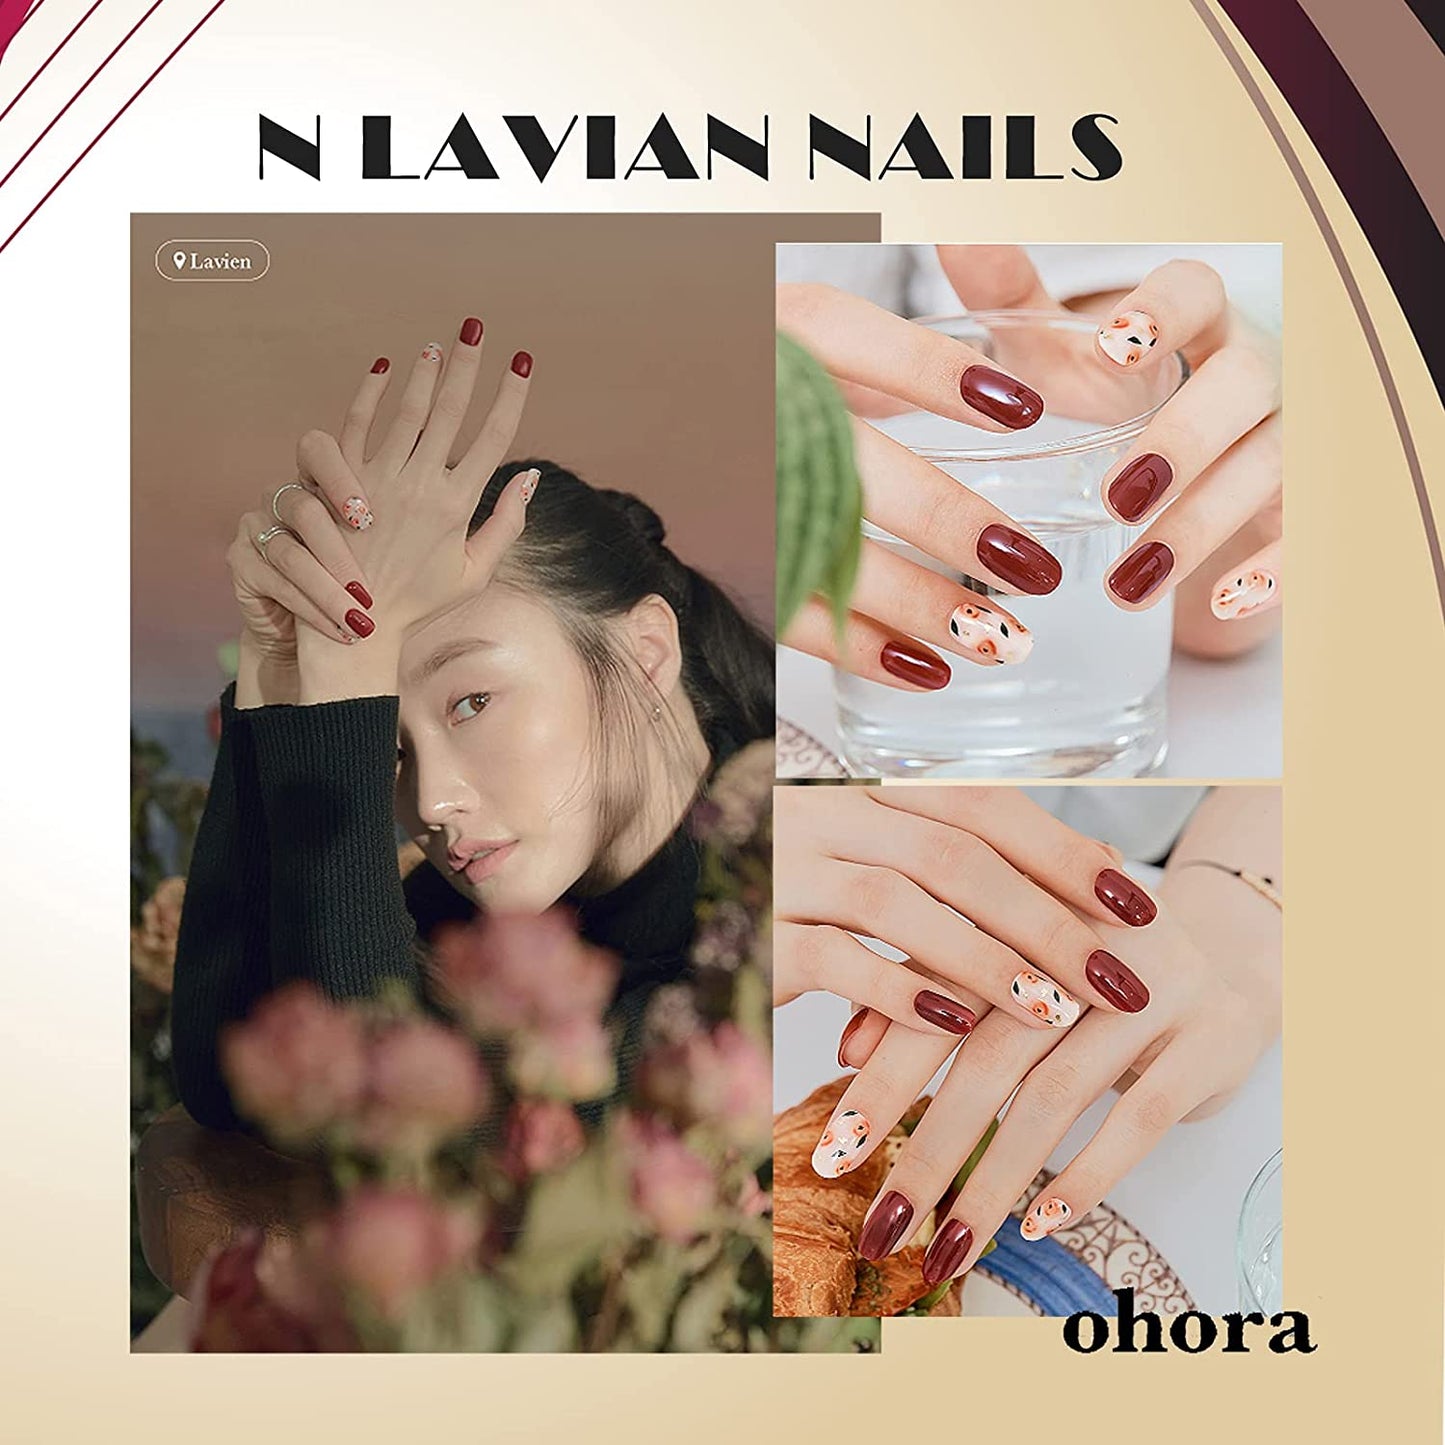 Ohora (N Lavian Nails)